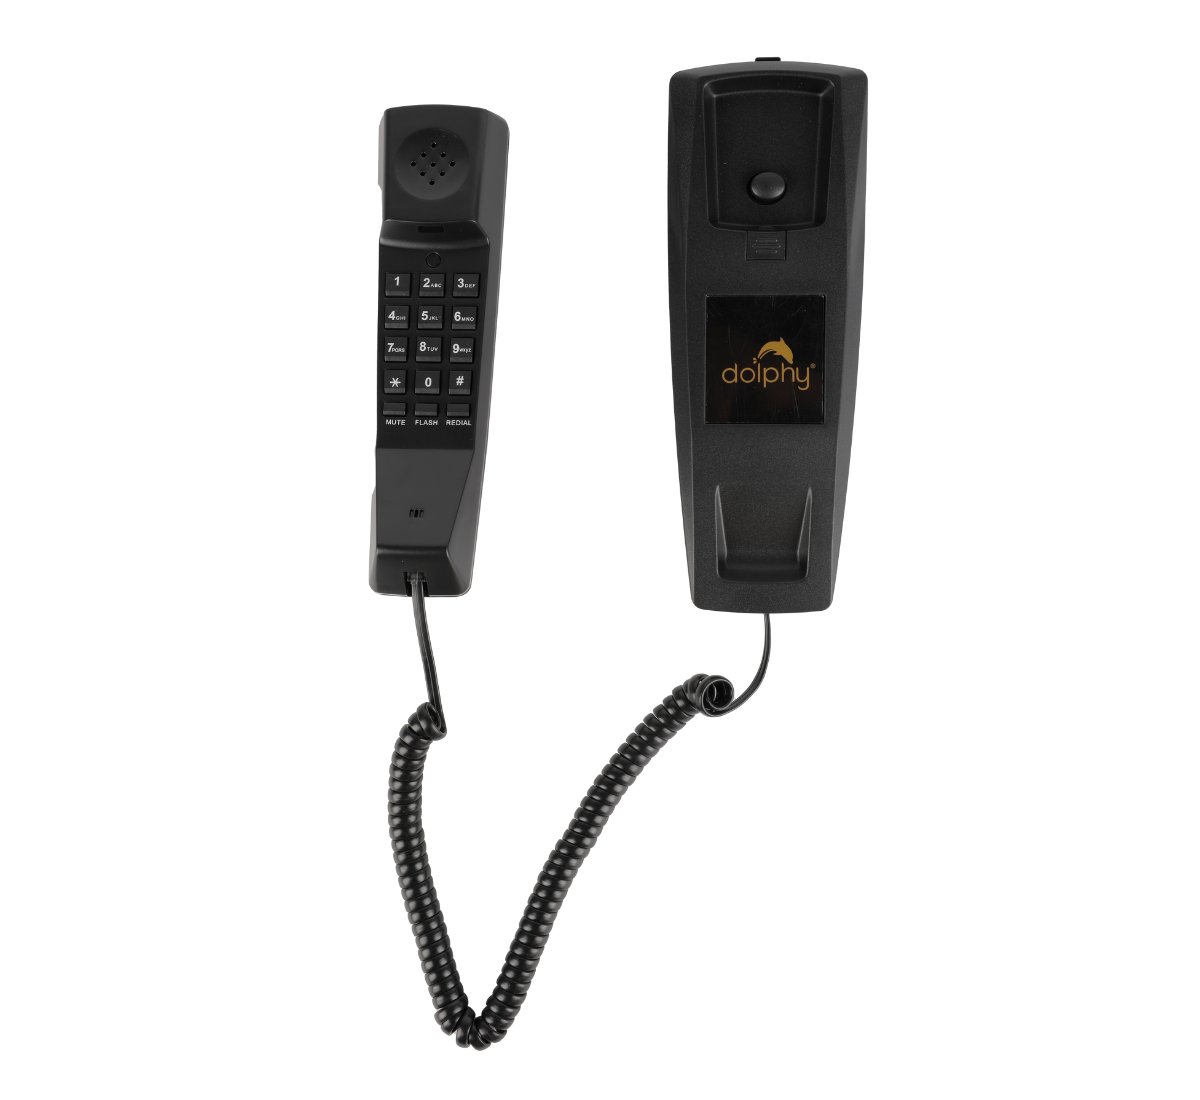 Communication Telephone For Office Home Hotel
